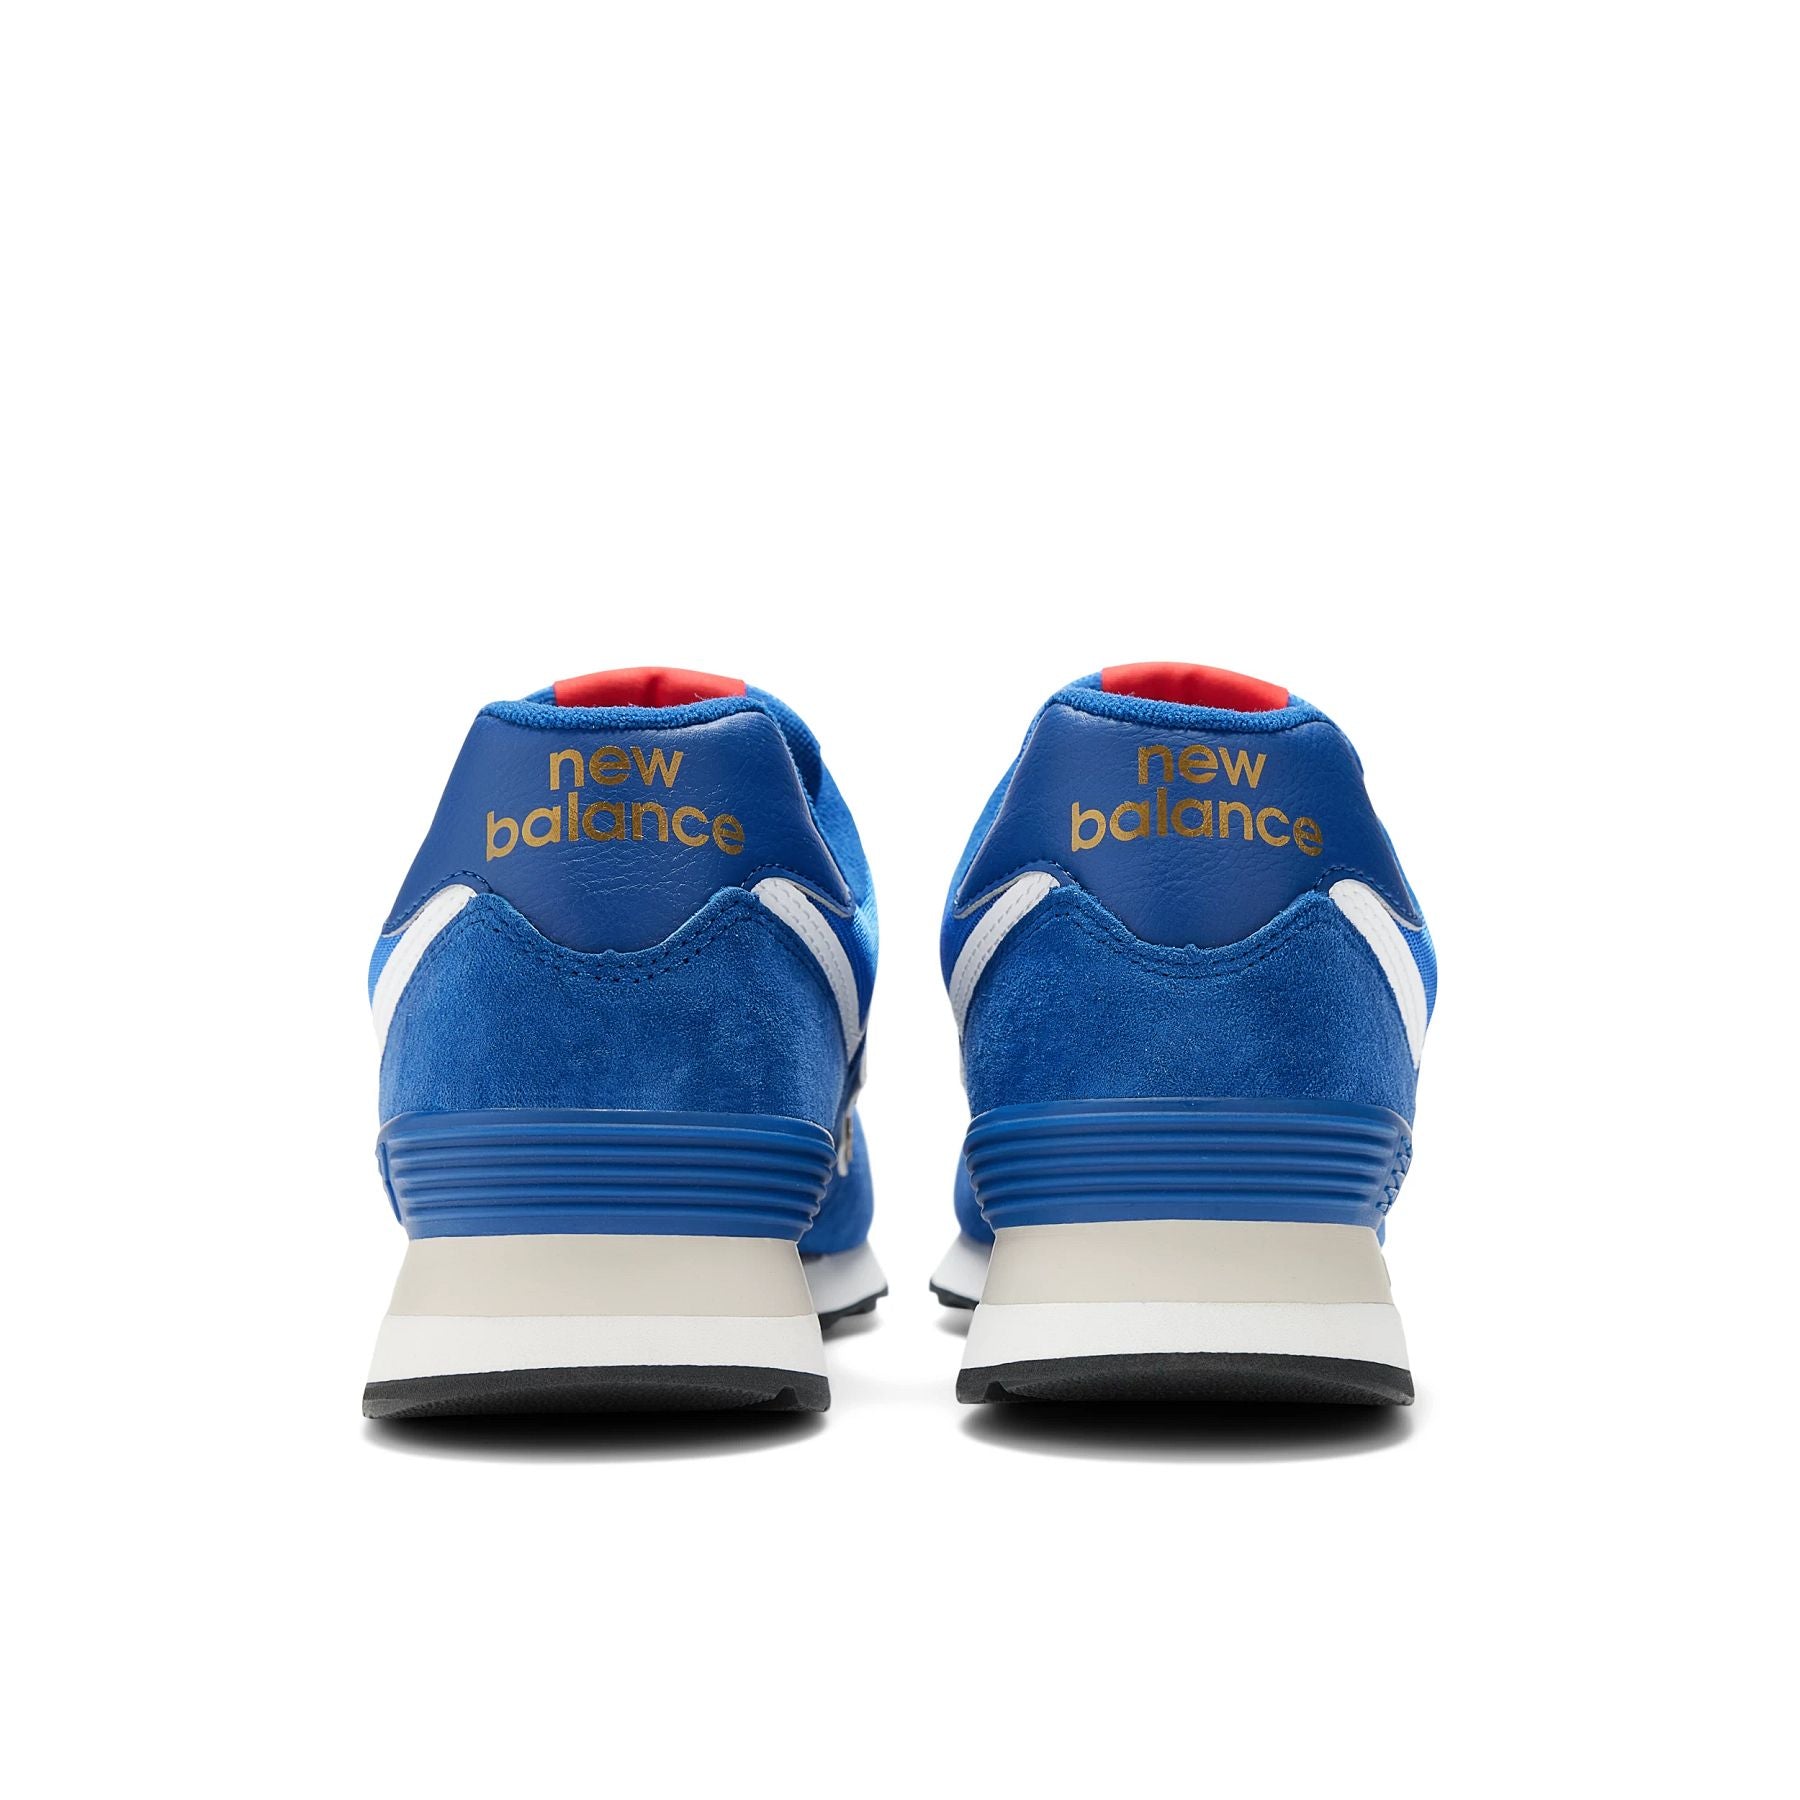 Back view of the Men's 574 in Navy/Gold